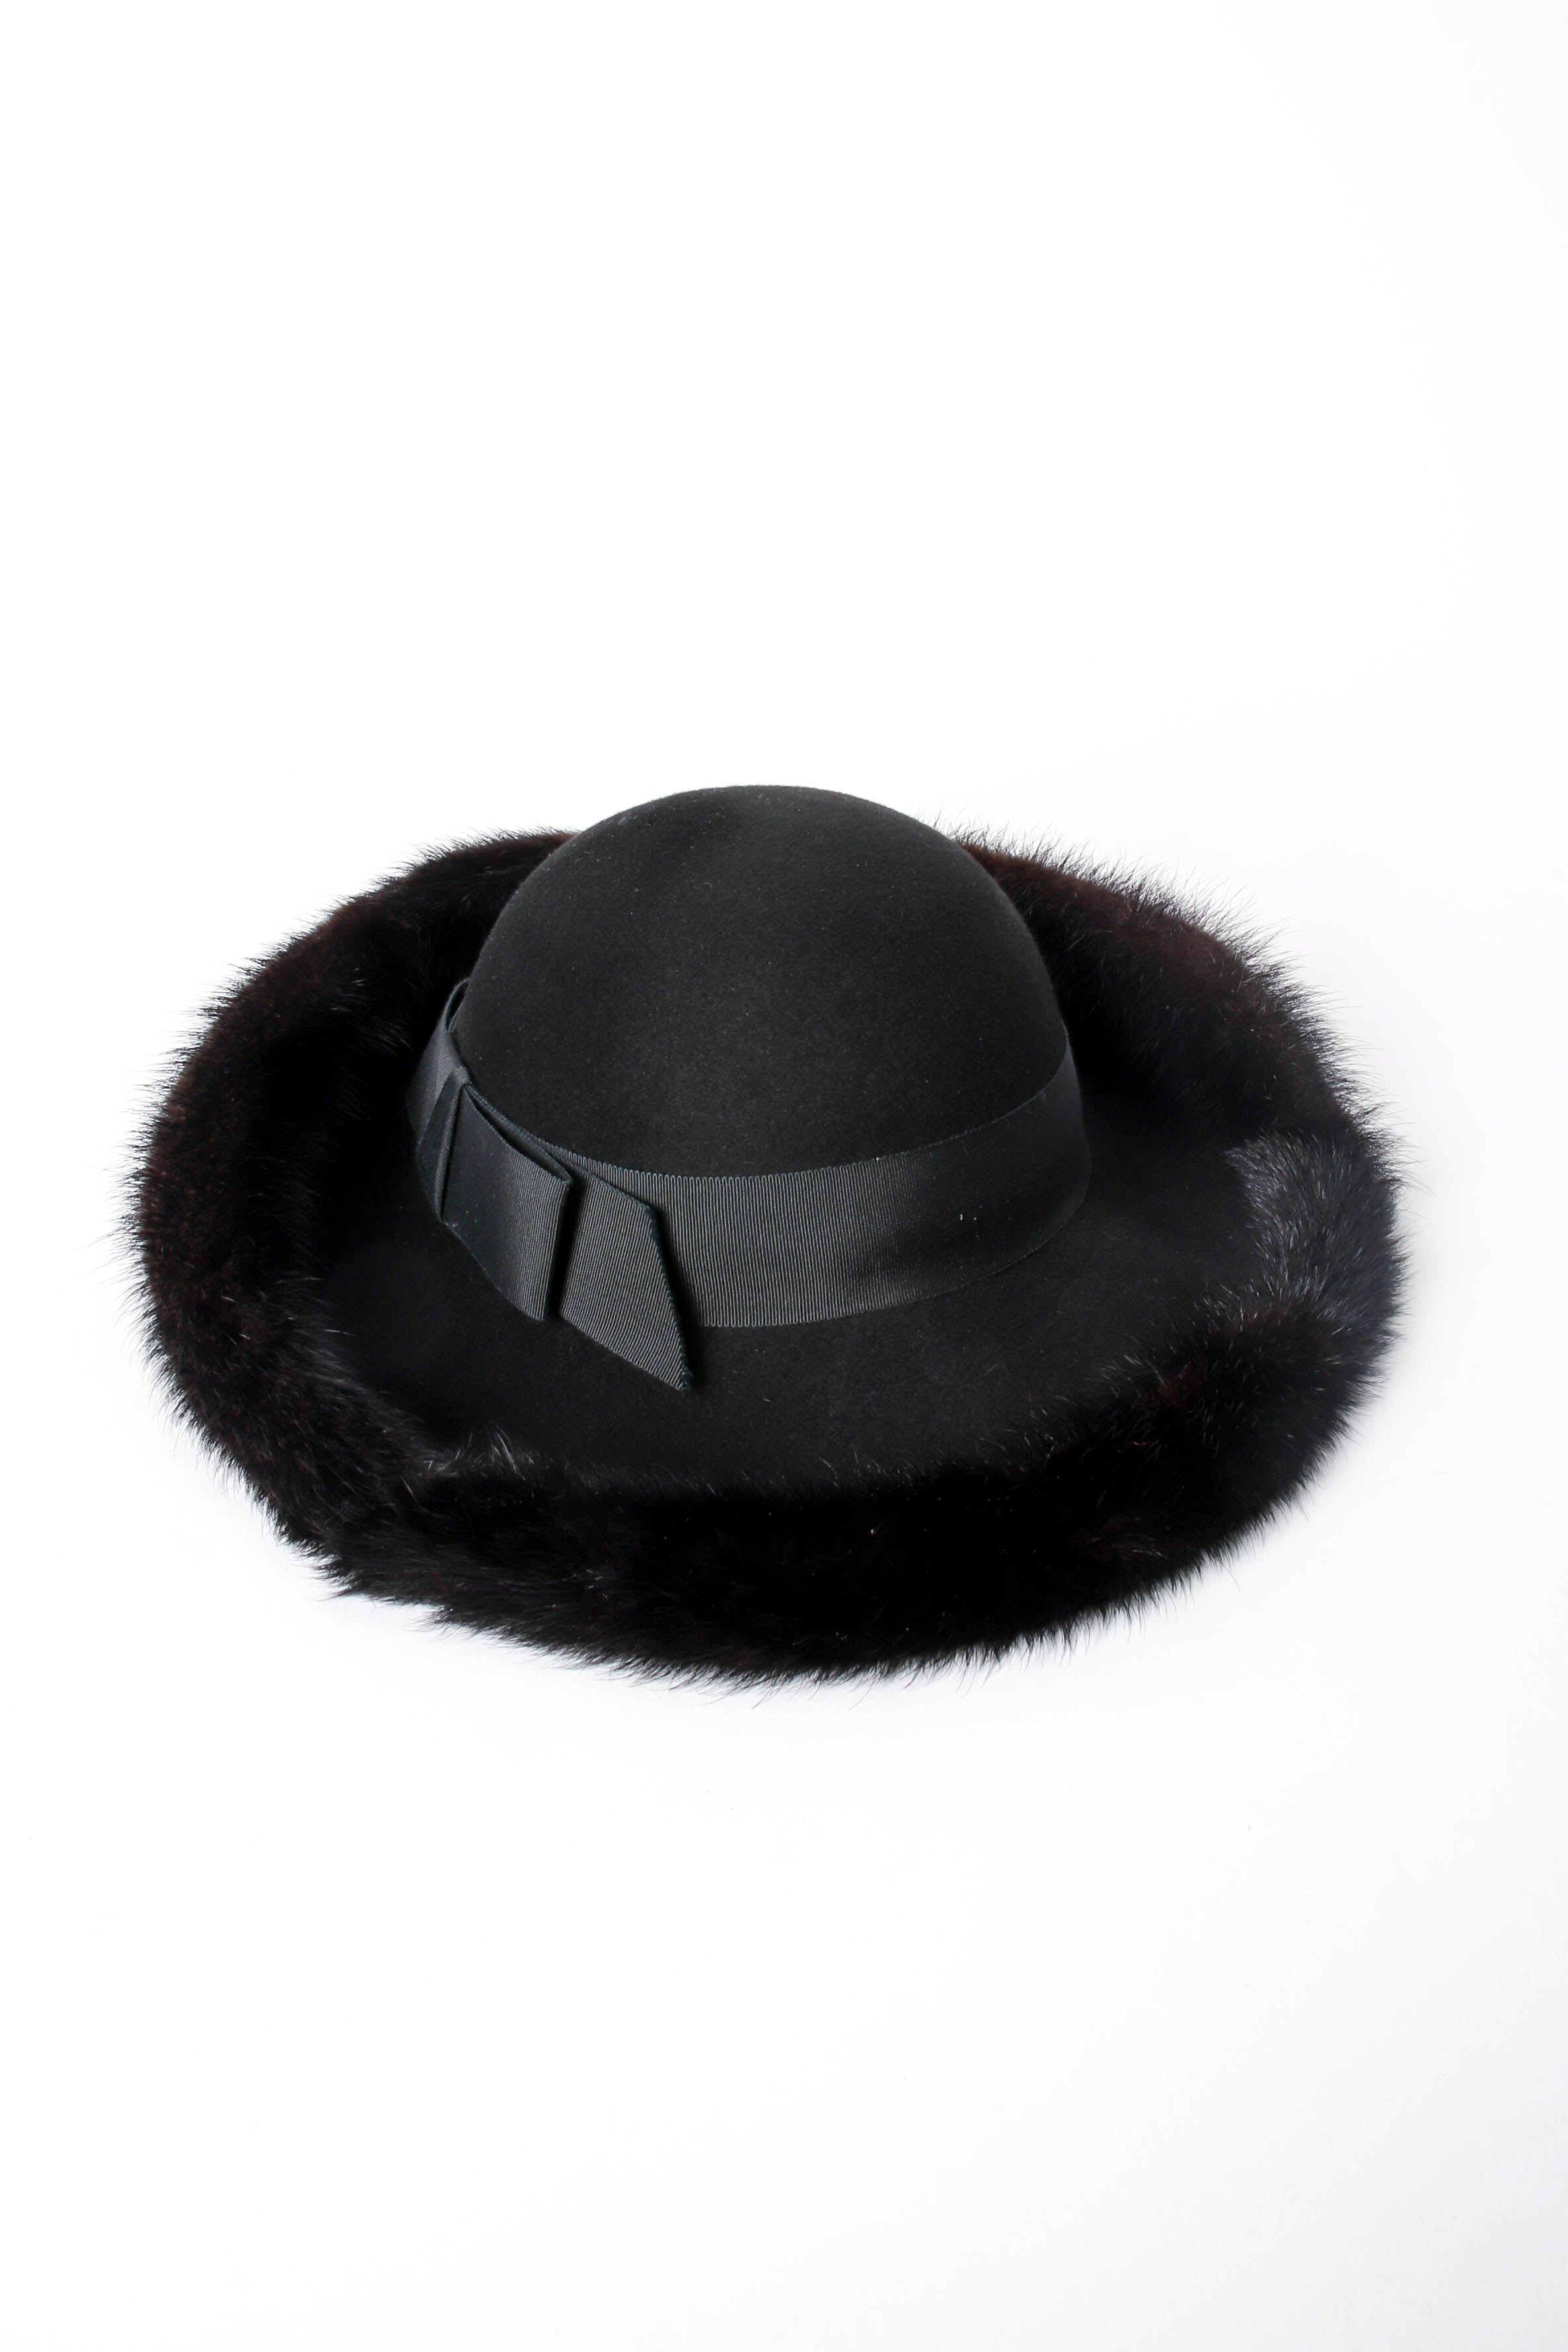 Vintage Mr. John Excello Fur-Trimmed Petite Halo Hat angle at Recess Los Angeles